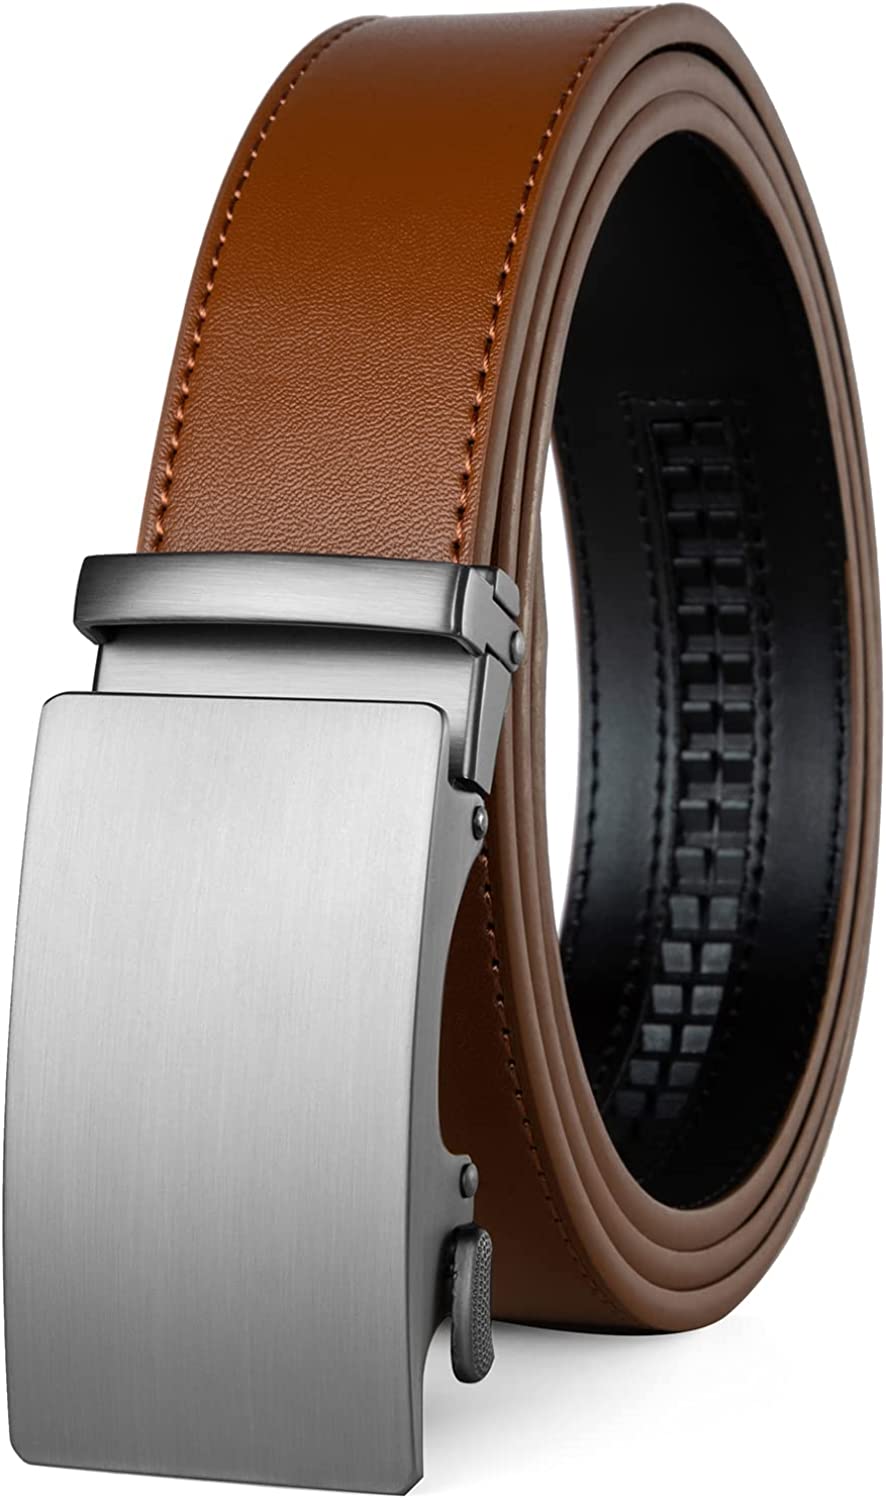 Men's Classic Leather Belt from Crew Clothing Company